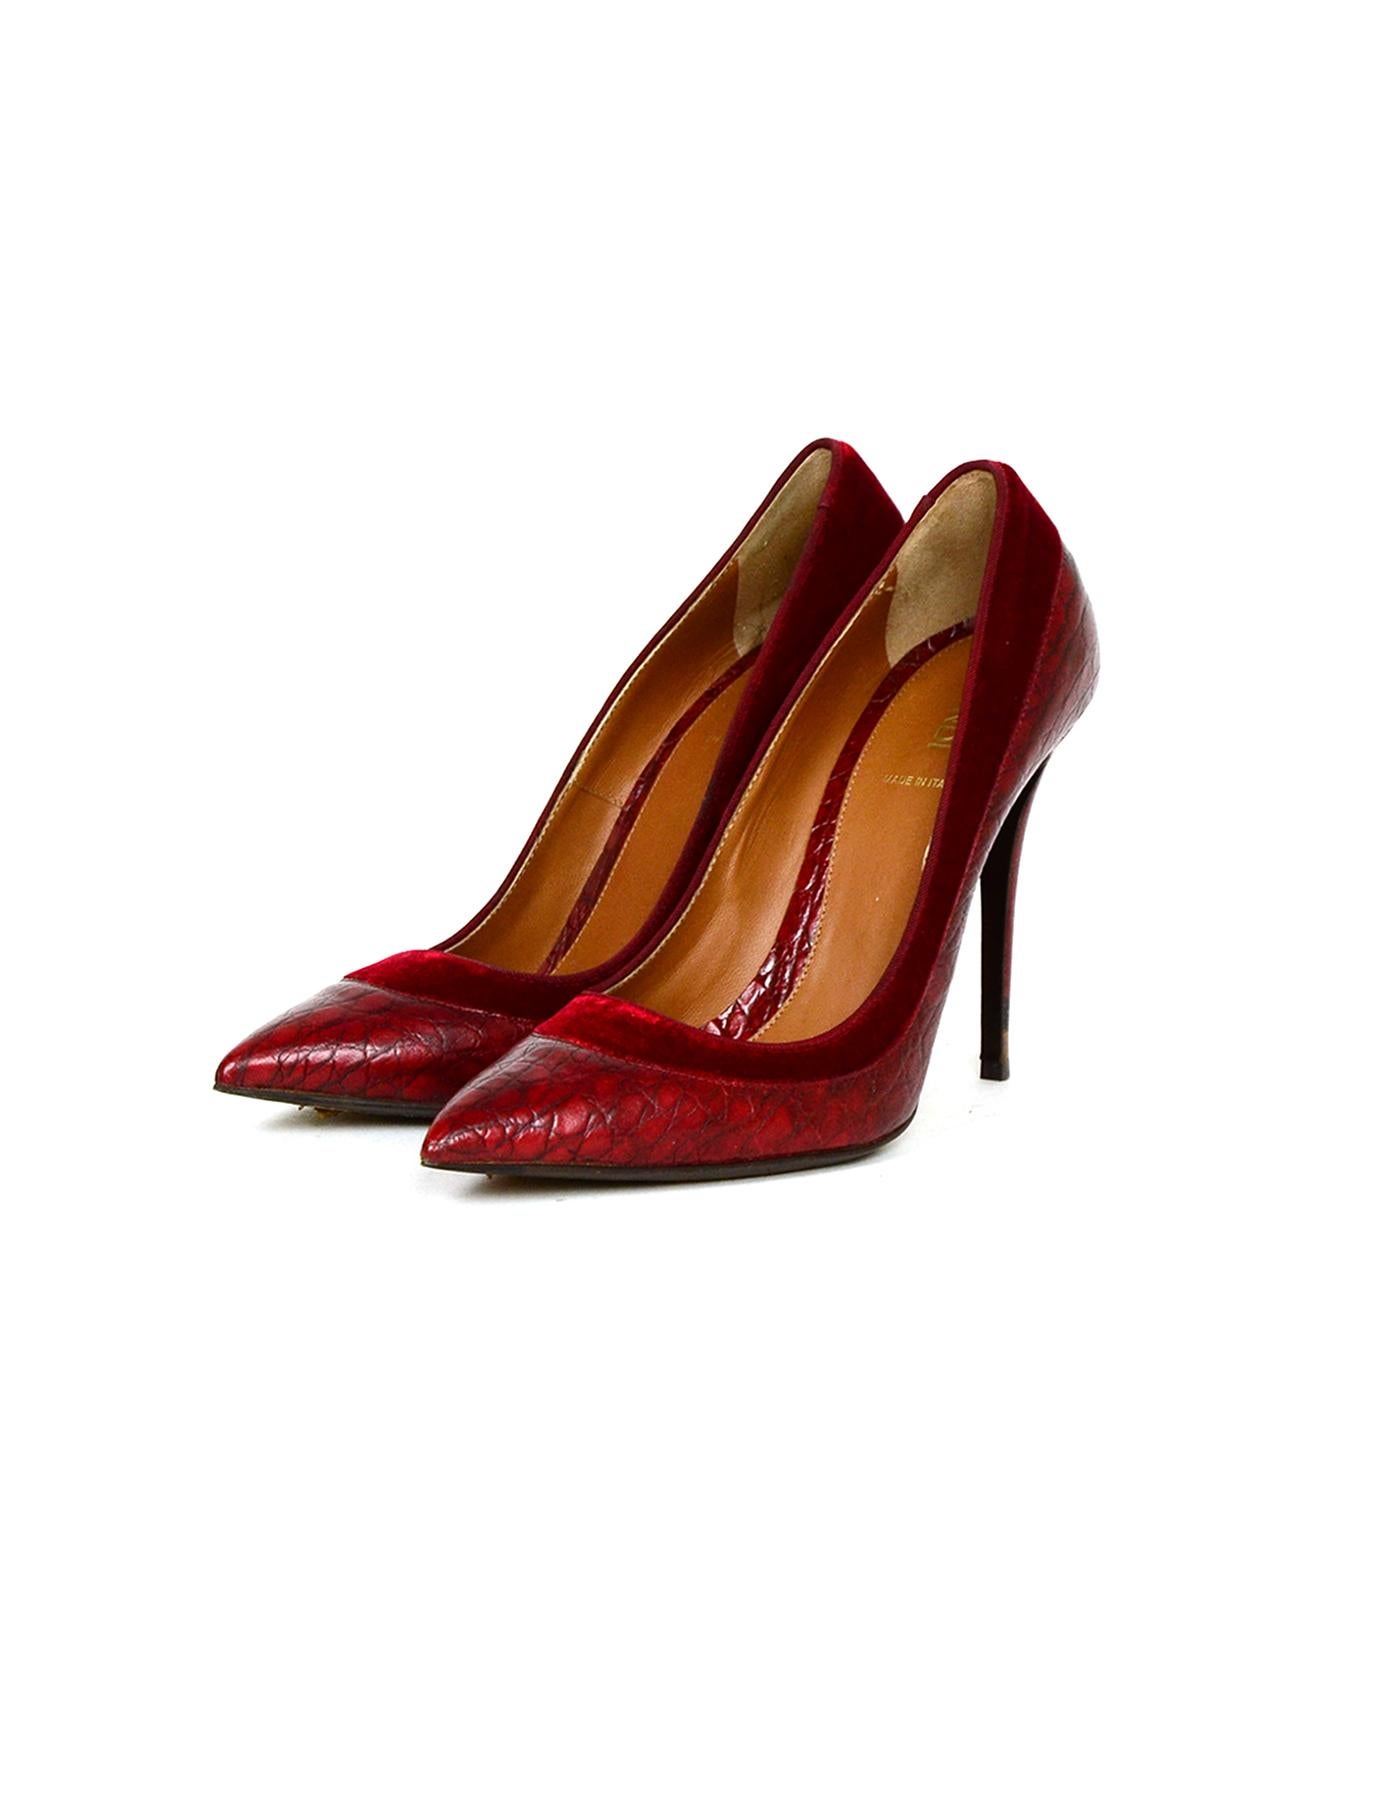 Fendi Burgundy Croc Embossed Pointed Toe Pumps w/ Velvet Trim sz 39 rt $790 

Made In: Italy
Color: Burgundy
Materials: Embossed leather, velvet trim
Closure/Opening: Slide on 
Overall Condition: Very good pre-owned condition, with light wear to